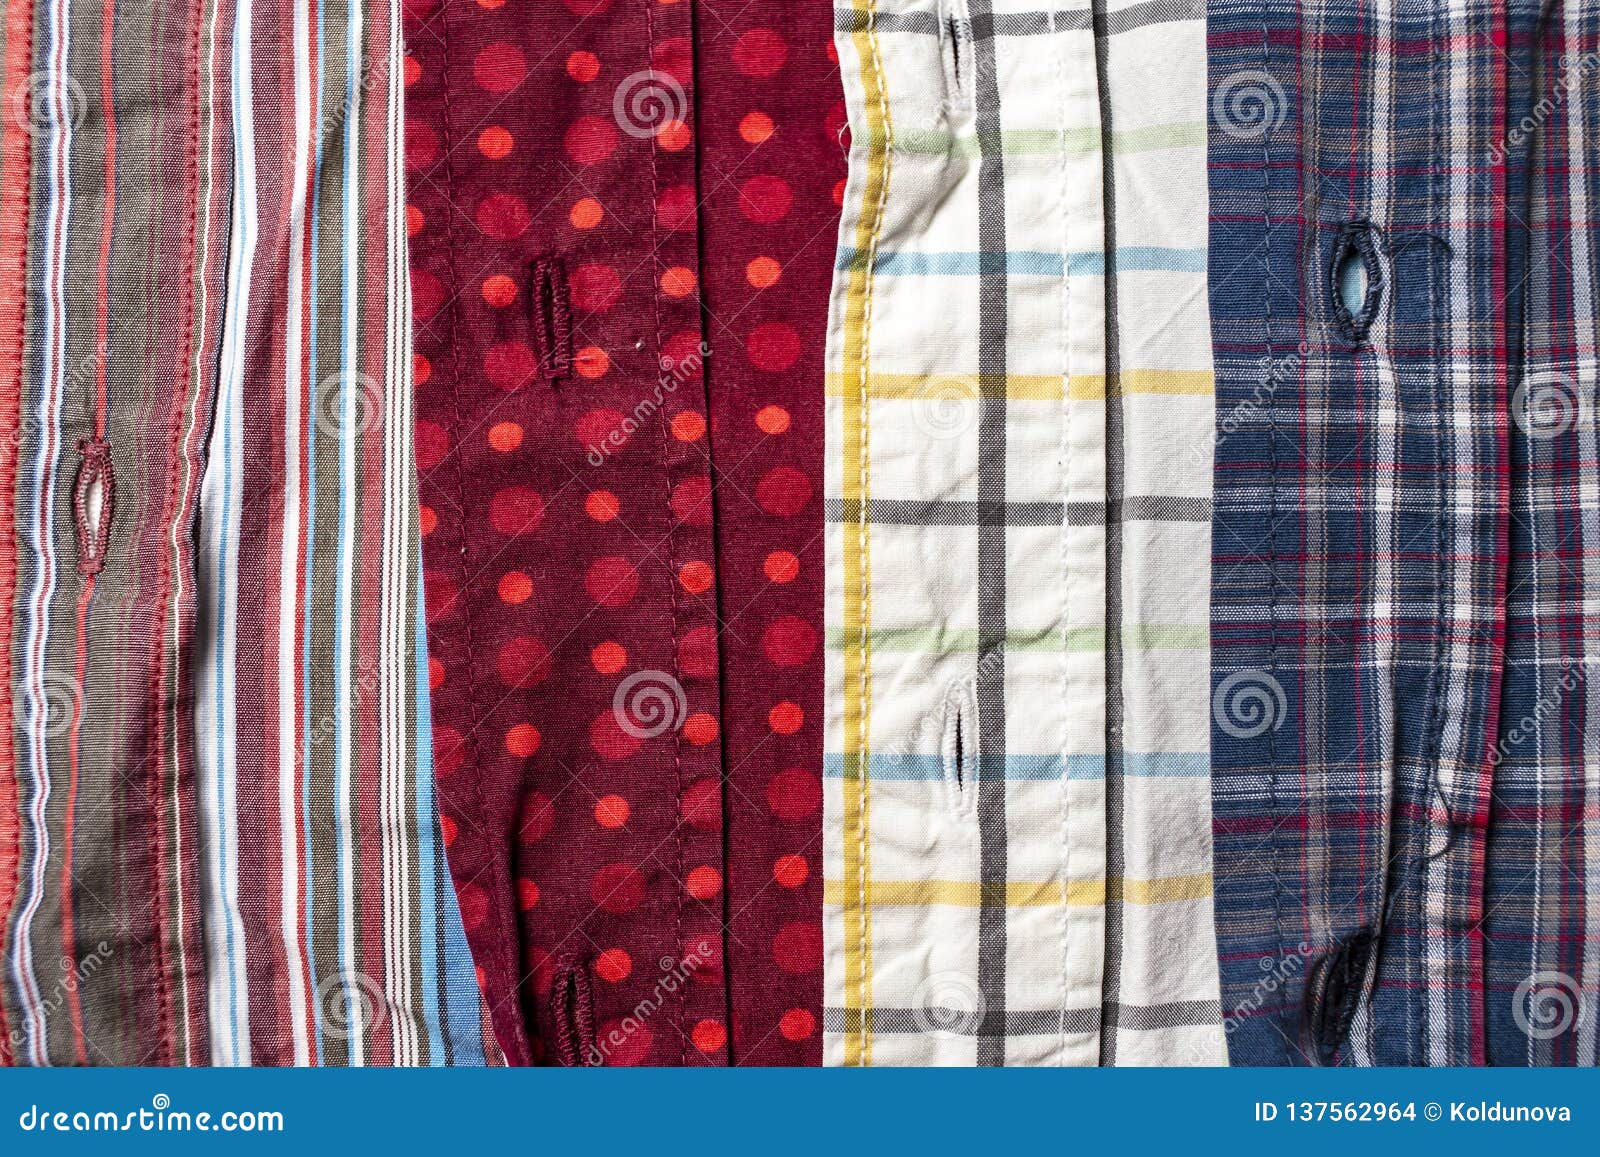 Shirts of Different Colors and Patterns are Next To Each Other Stock ...